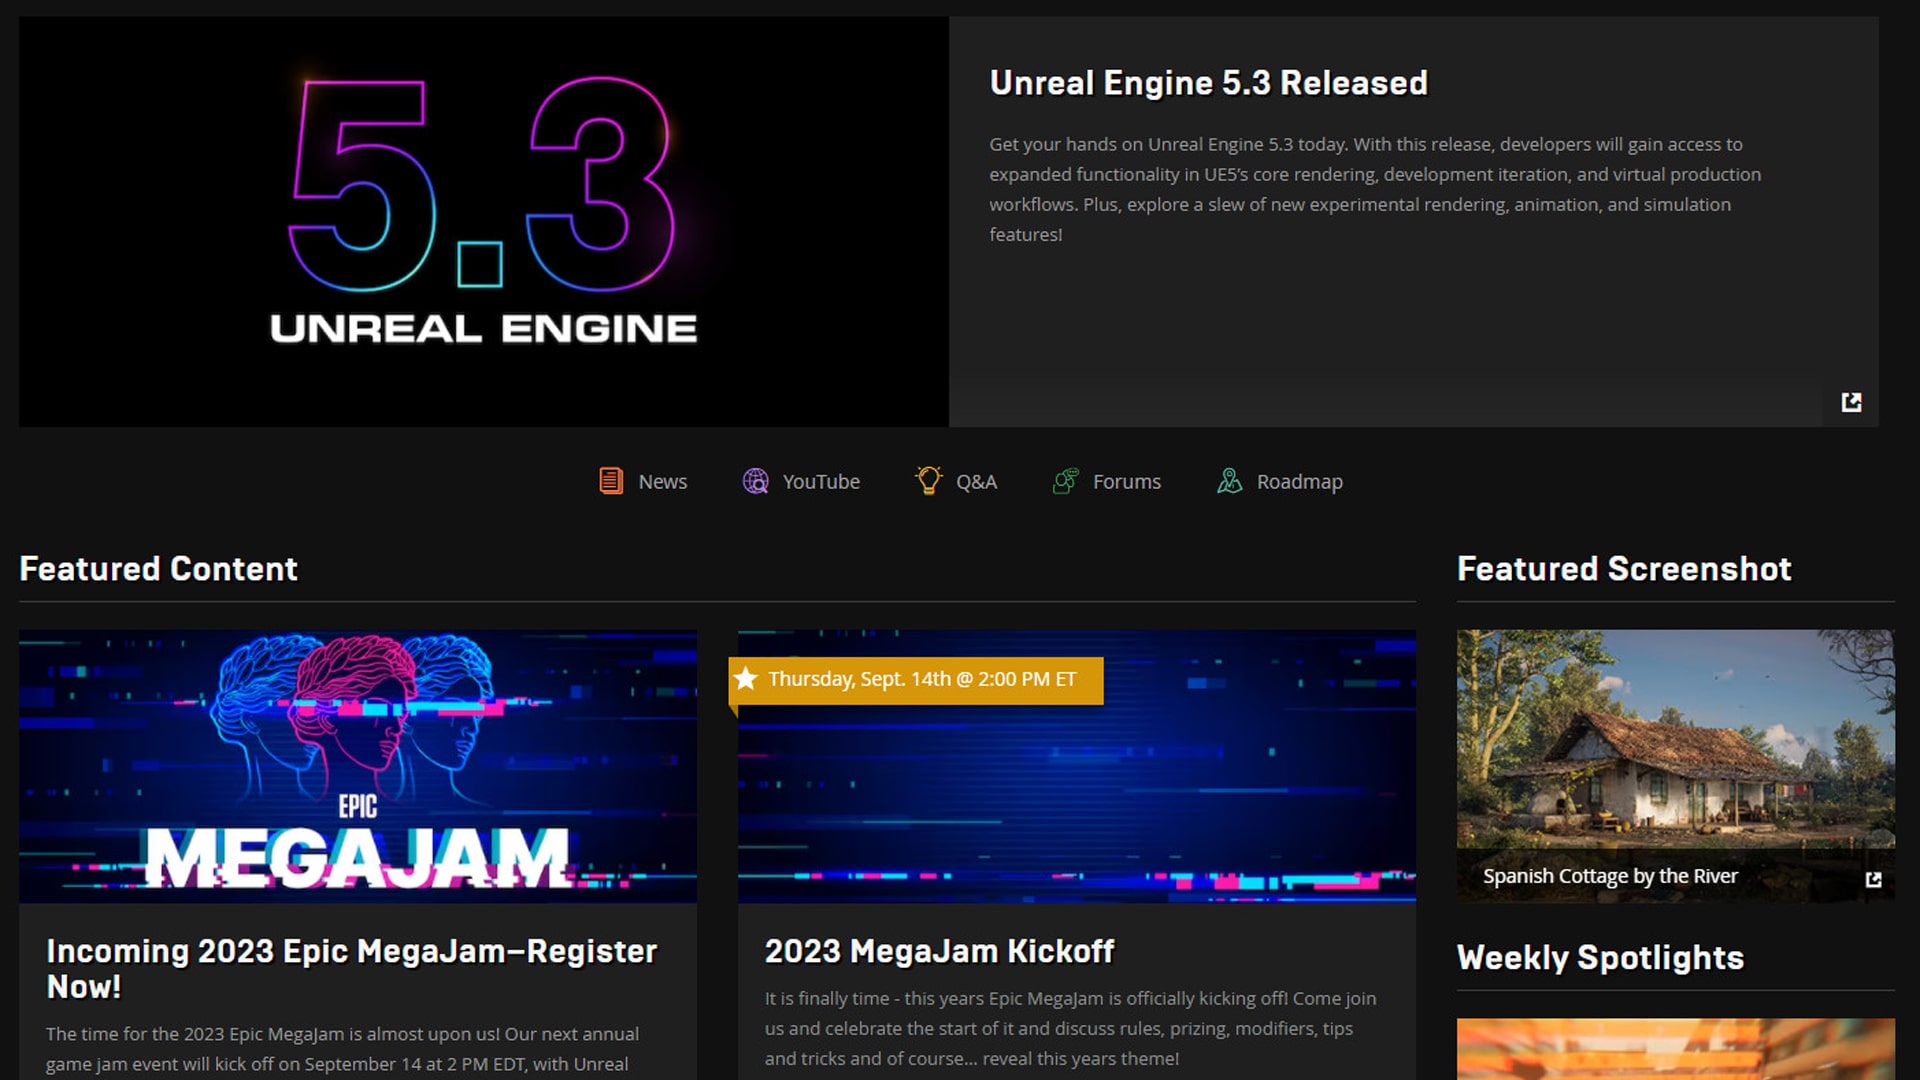 Unreal Engine with game development tools, marketplace and educational resources